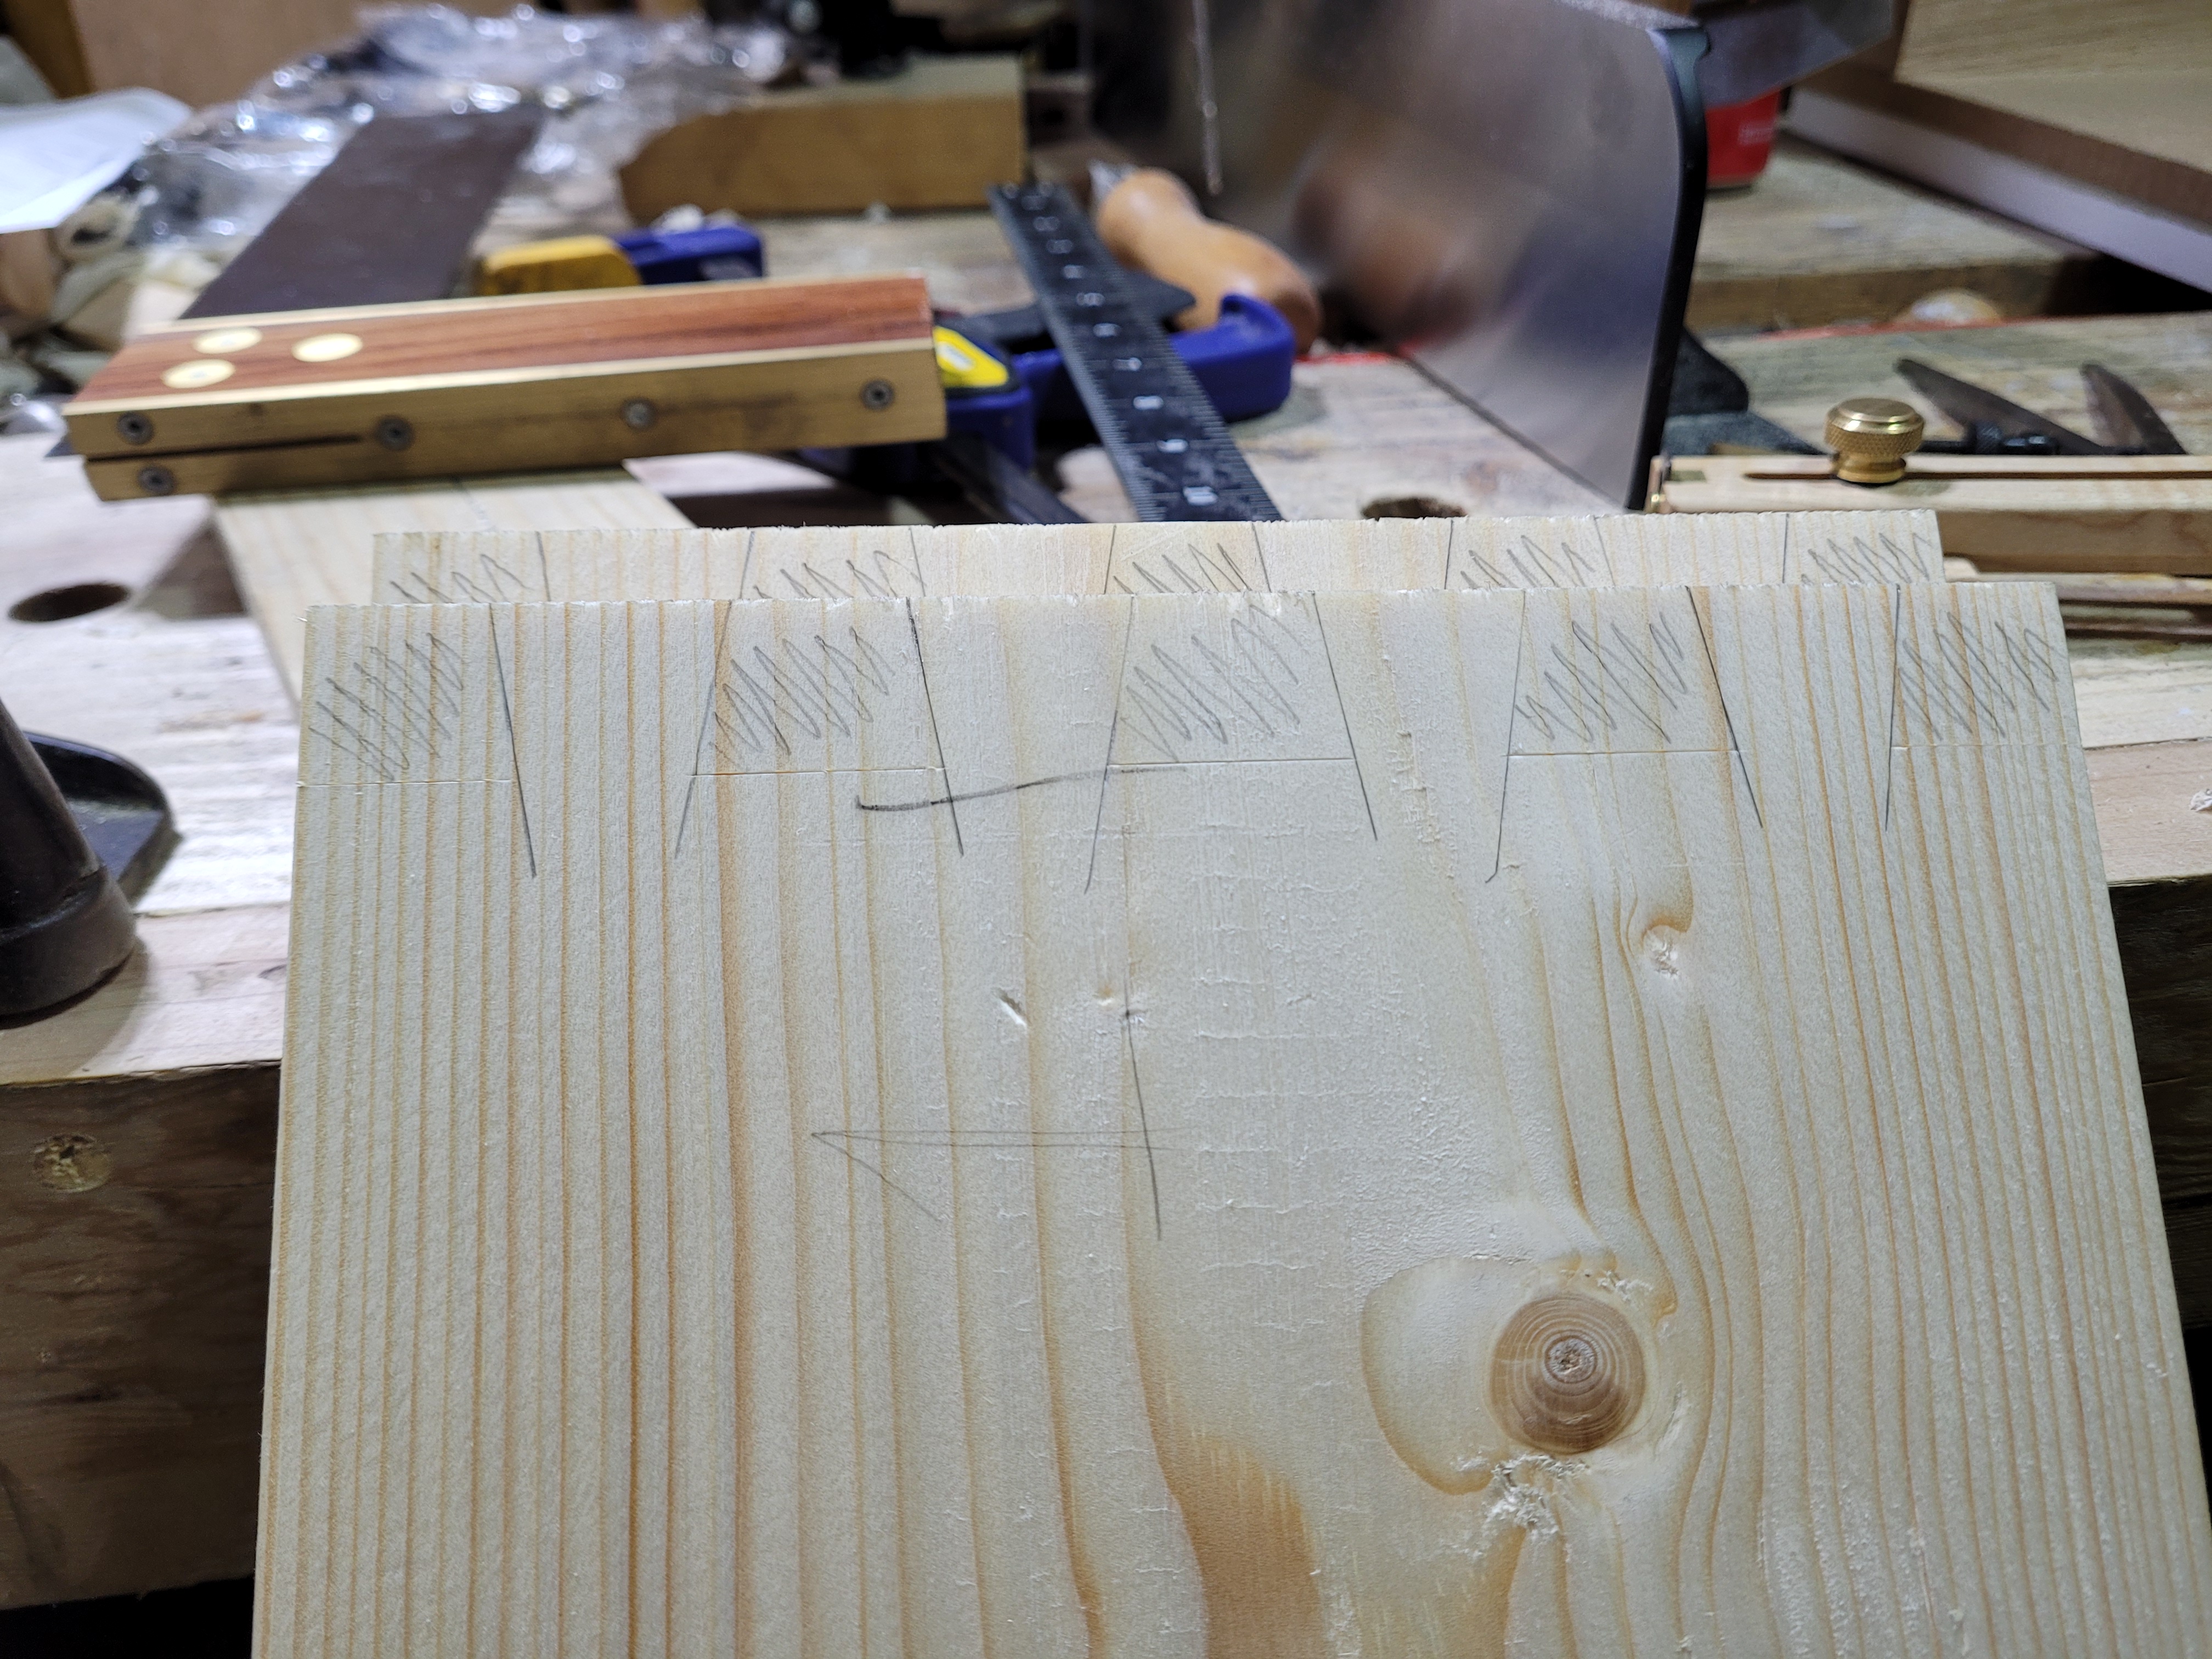 Laying out Dovetails